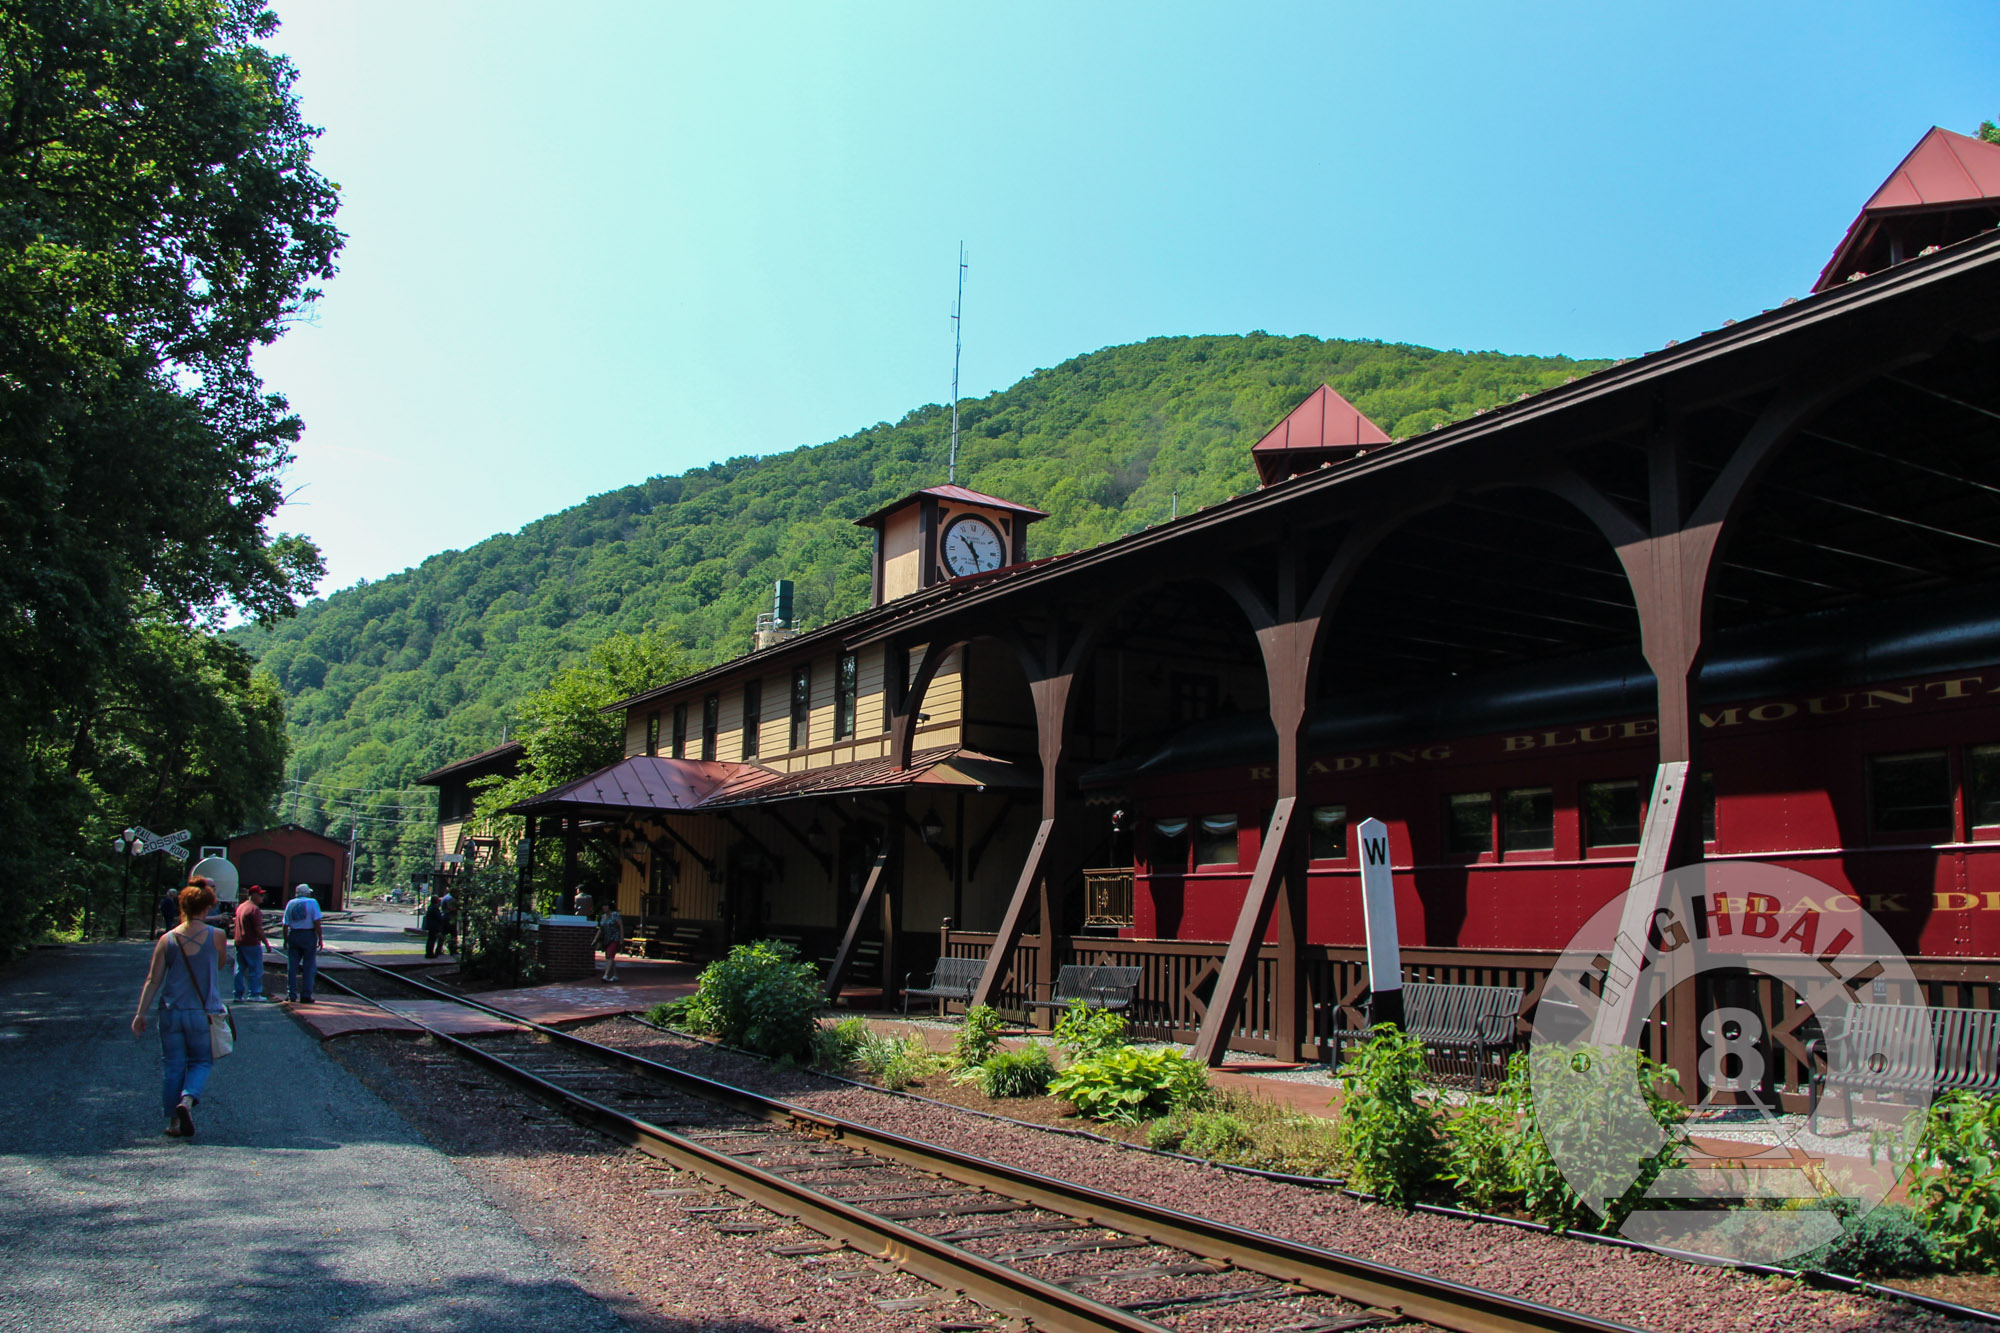 Exterior of the Reading Blue Mountain & Northern Railroad's corporate headquarters, a refurbished train station in Port Clinton, Pennsylvania, USA, 2016.